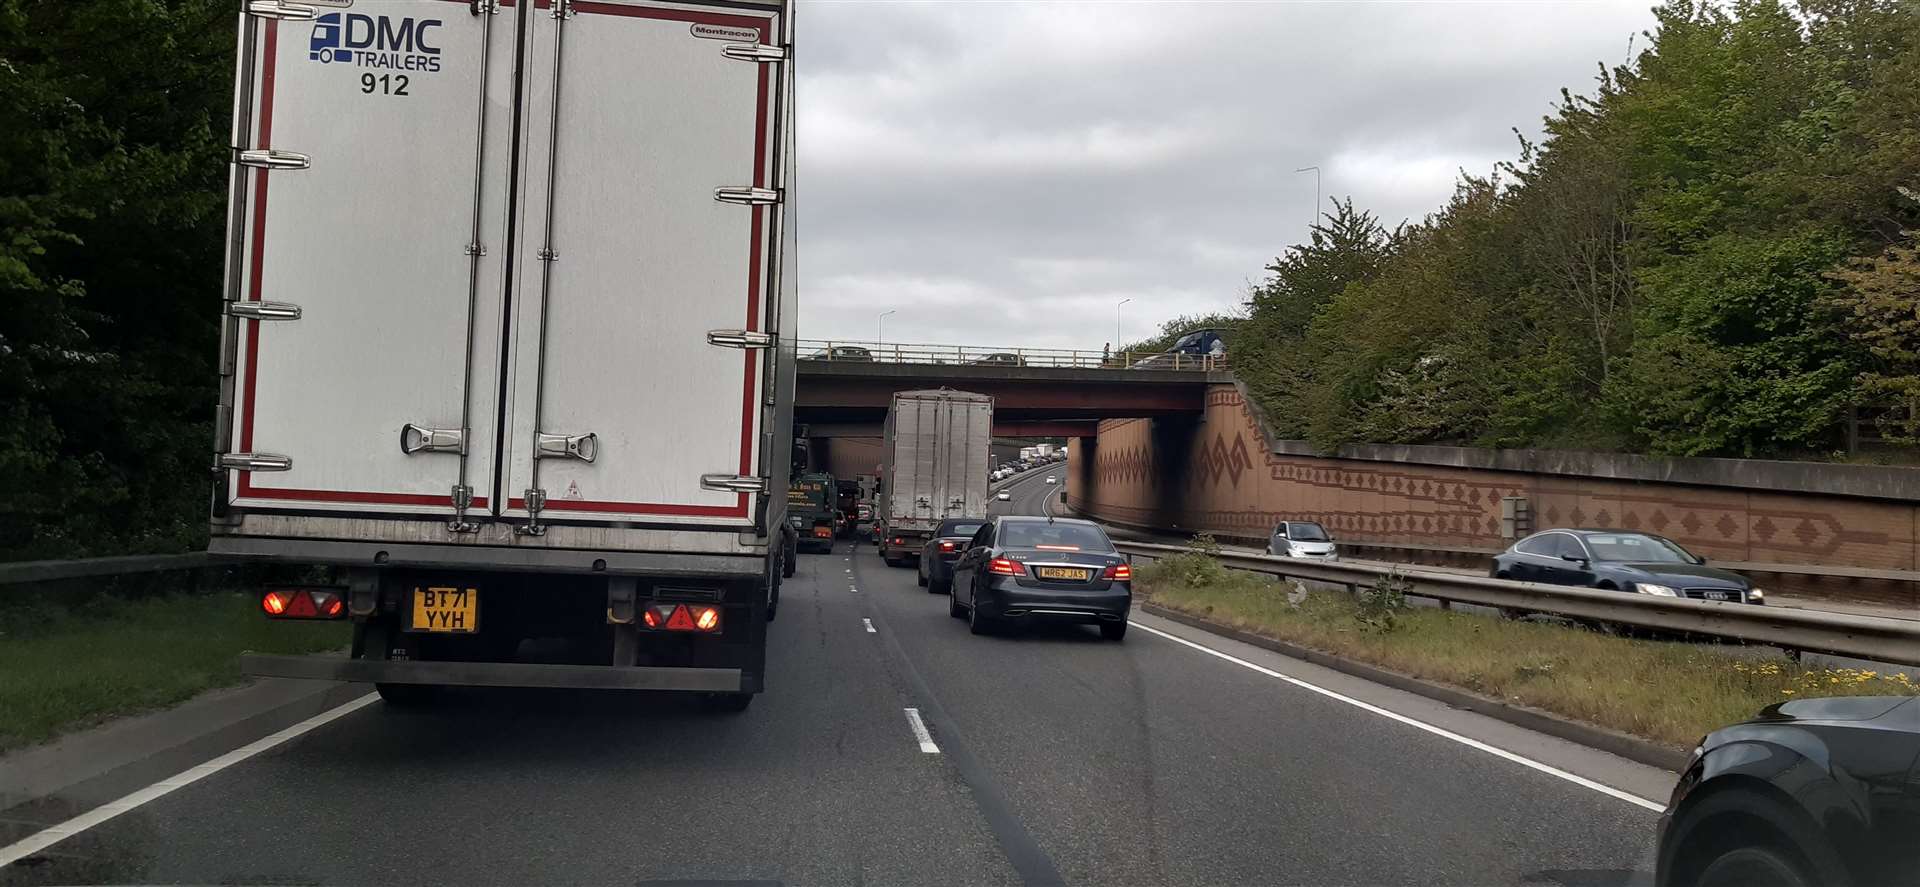 Traffic at a standstill on the A249 at Sittingbourne as drivers try to reach the M2. Picture: Matt Ramsden